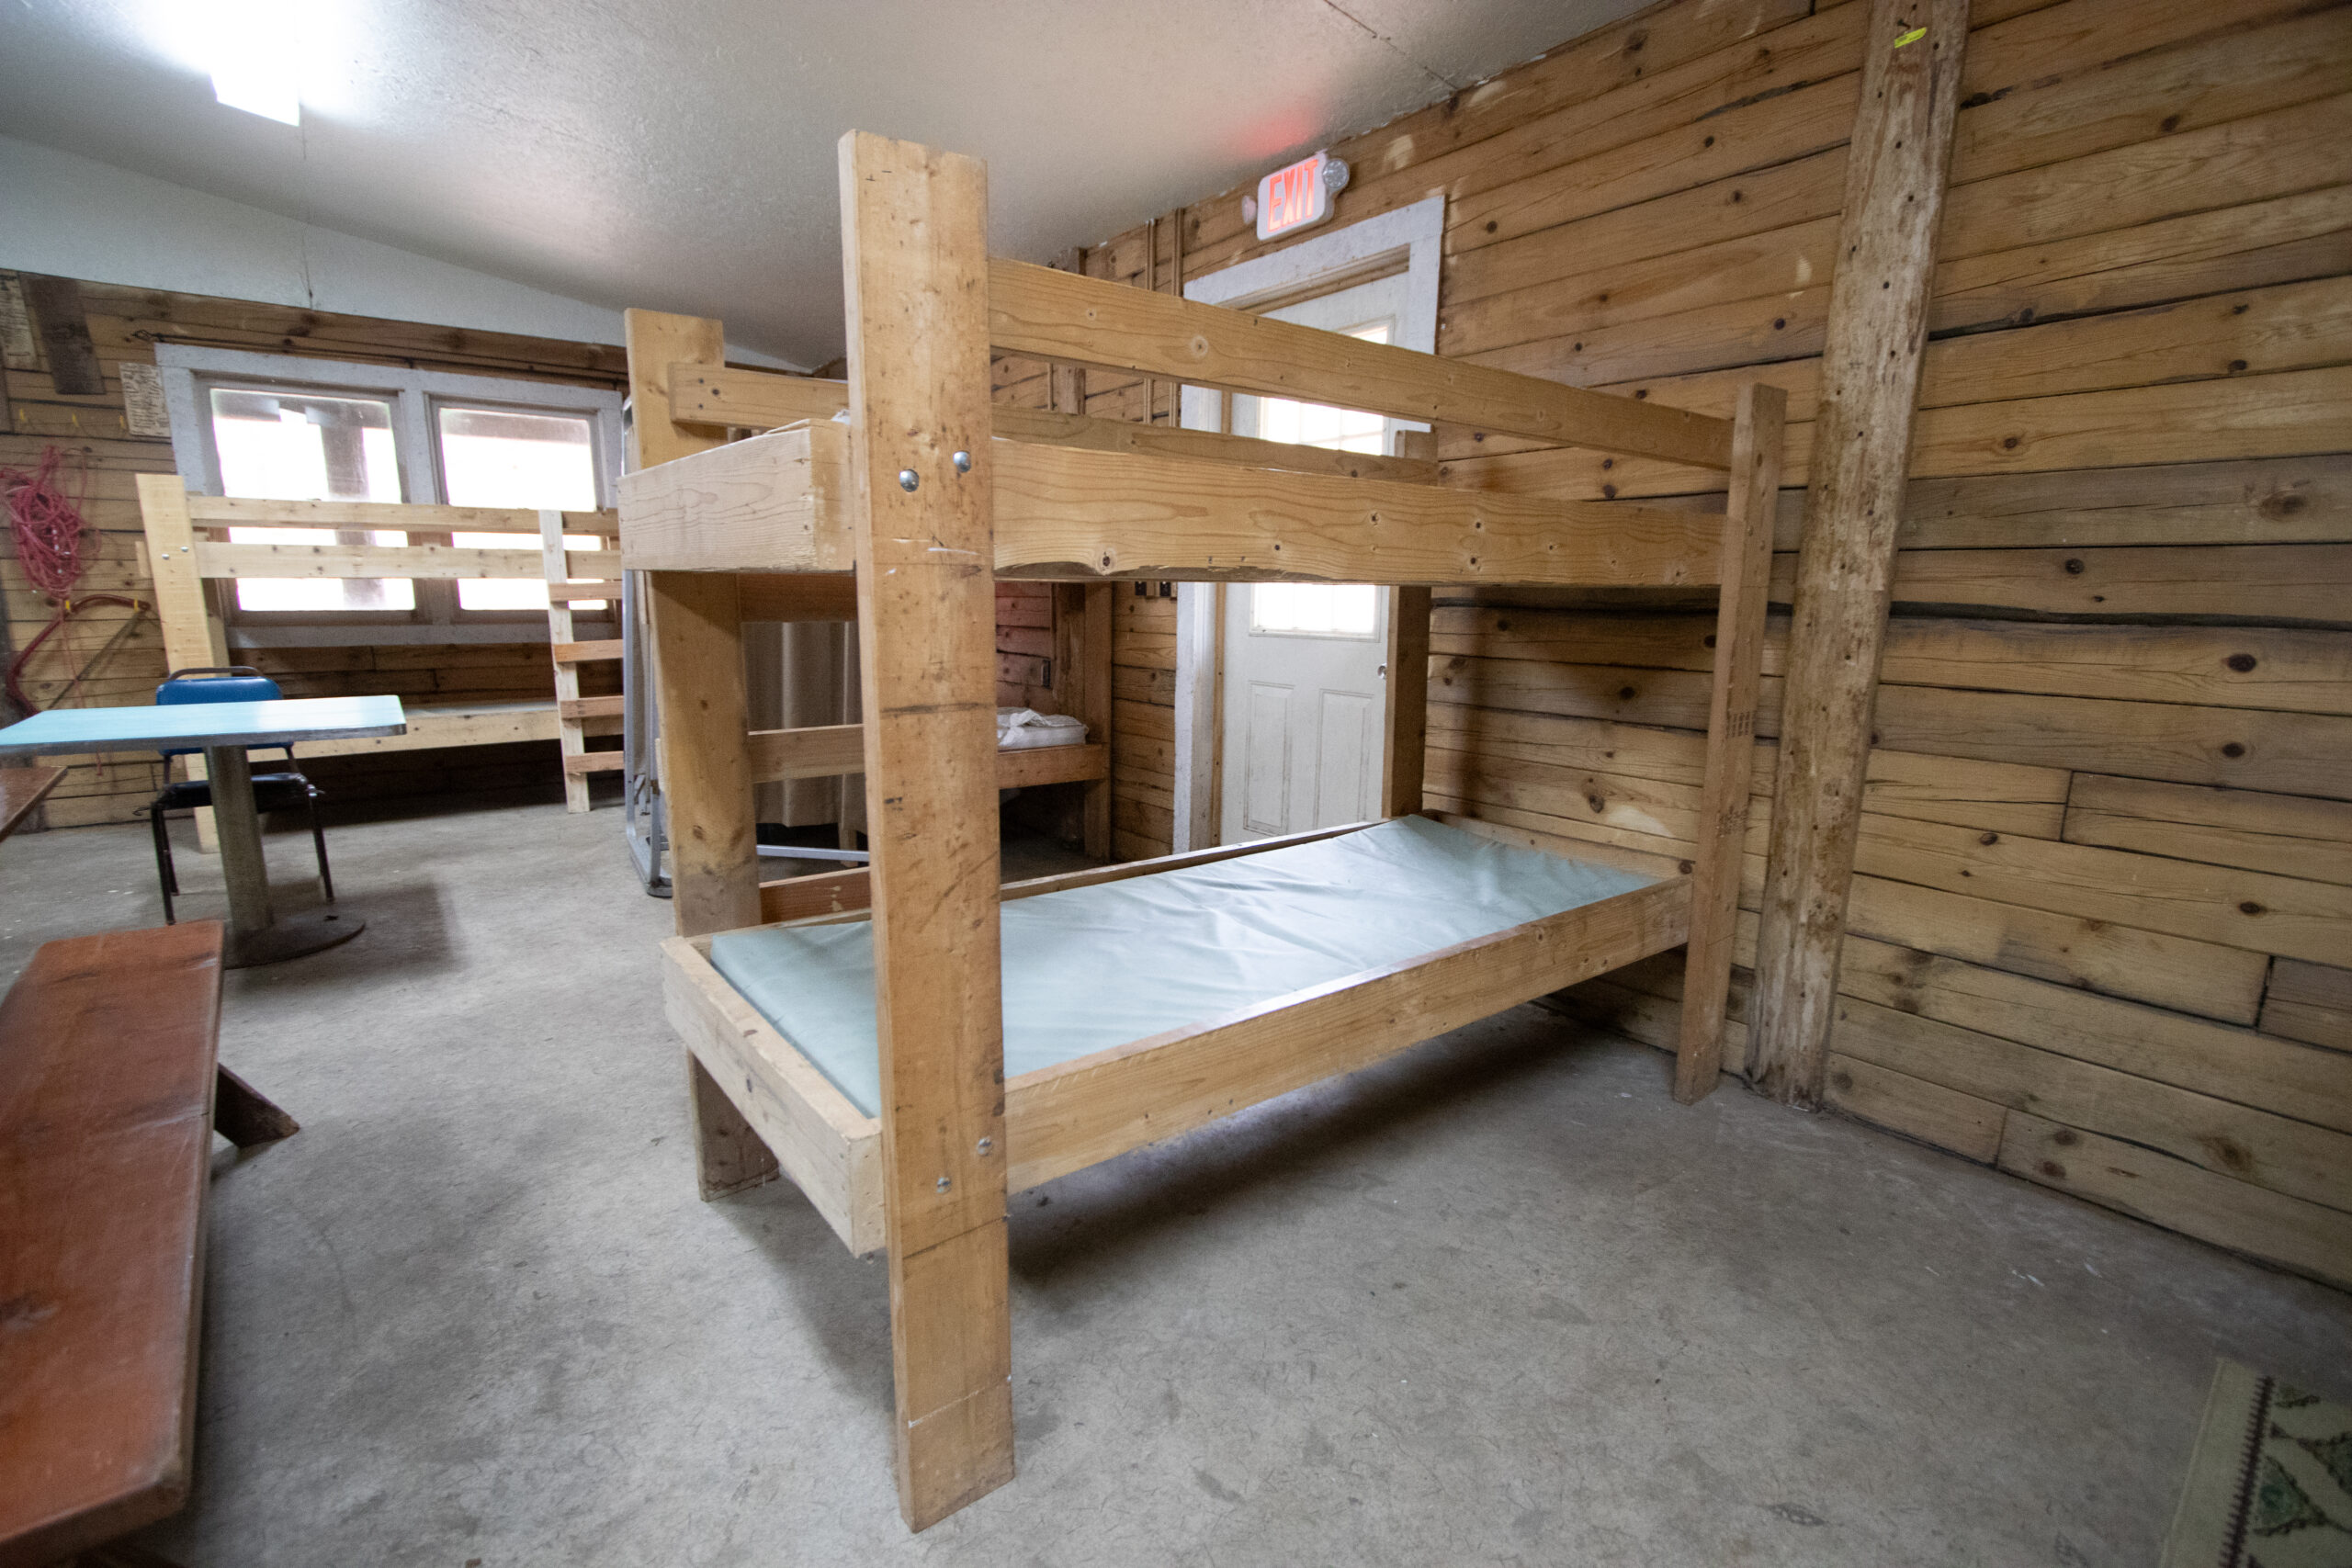 We have indoor sleeping for 32 people between the Evans and Harden cabins. These cabins offer heated sleeping space with electric plugs. Beds in these cabins are first-come, first-served.